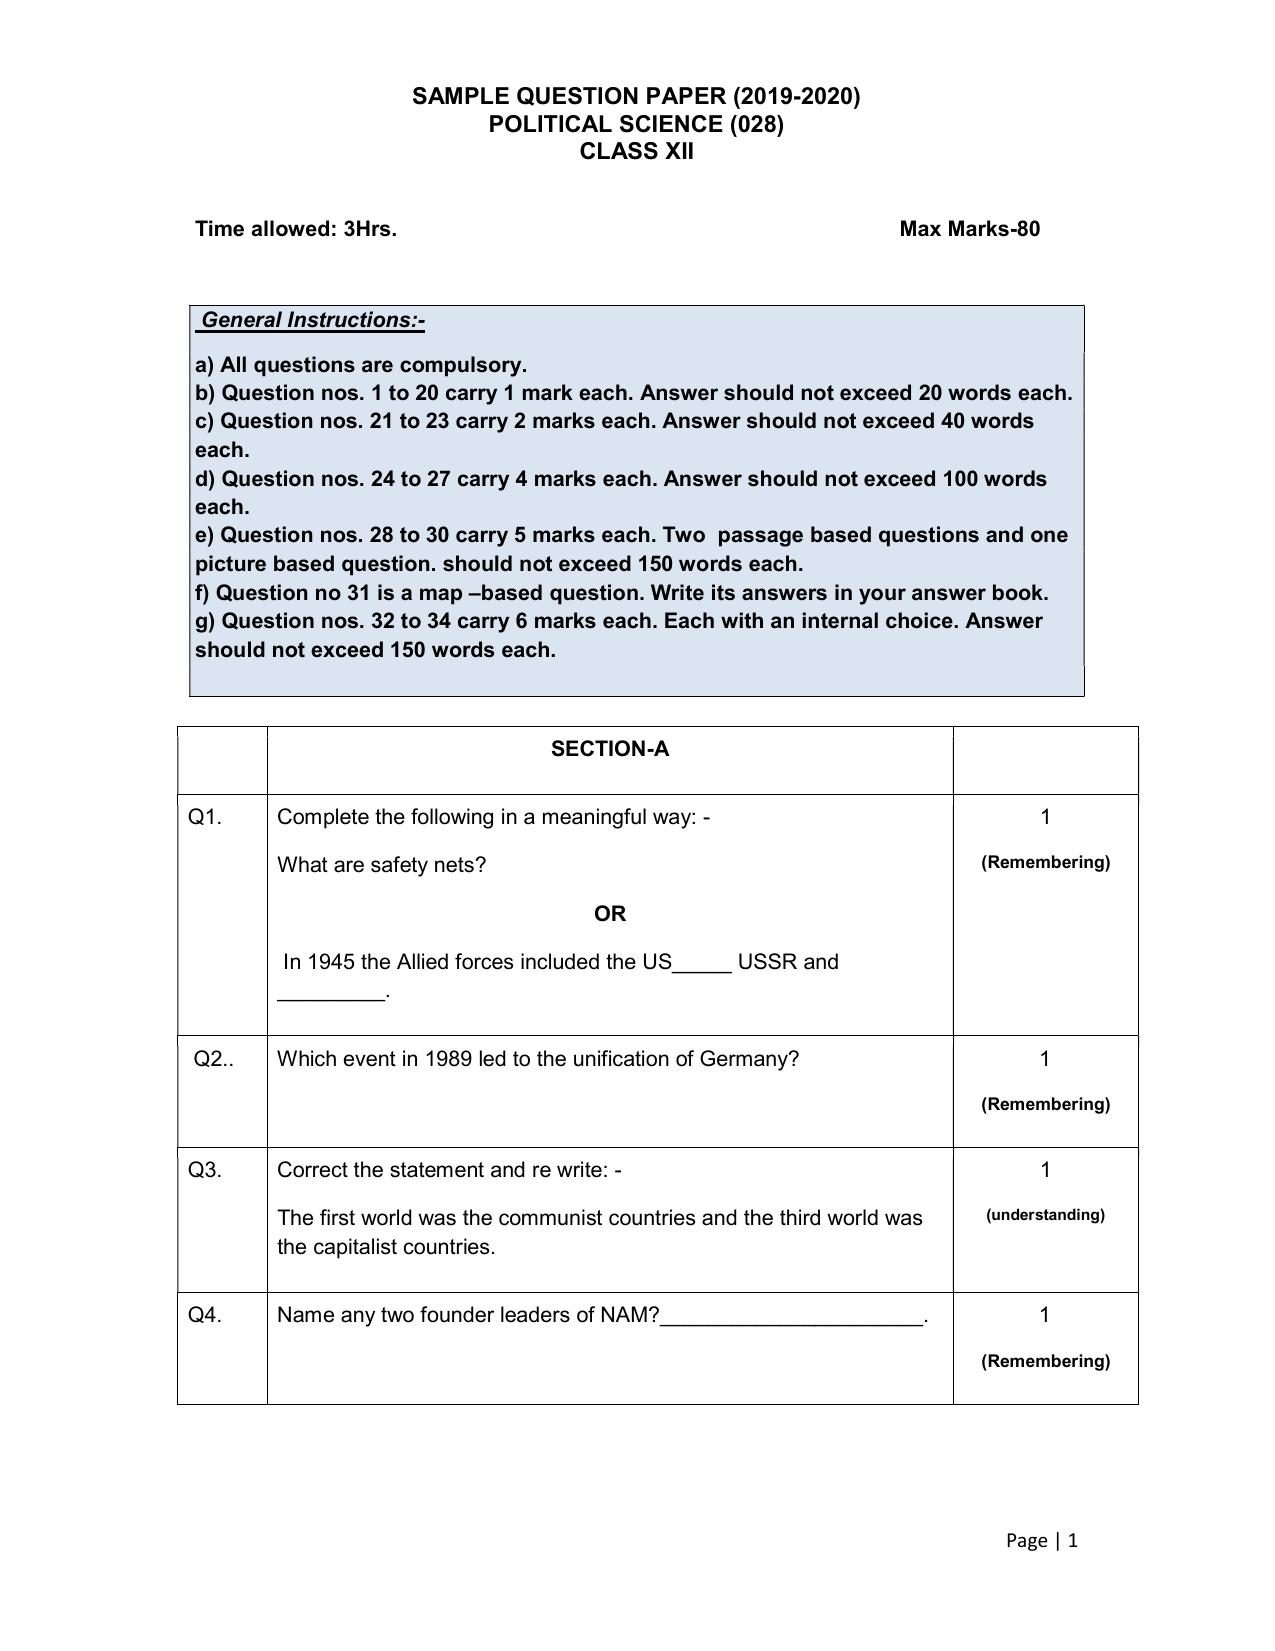 CBSE Class 12 Pol. Science -Sample Paper 2019-20 - Page 1